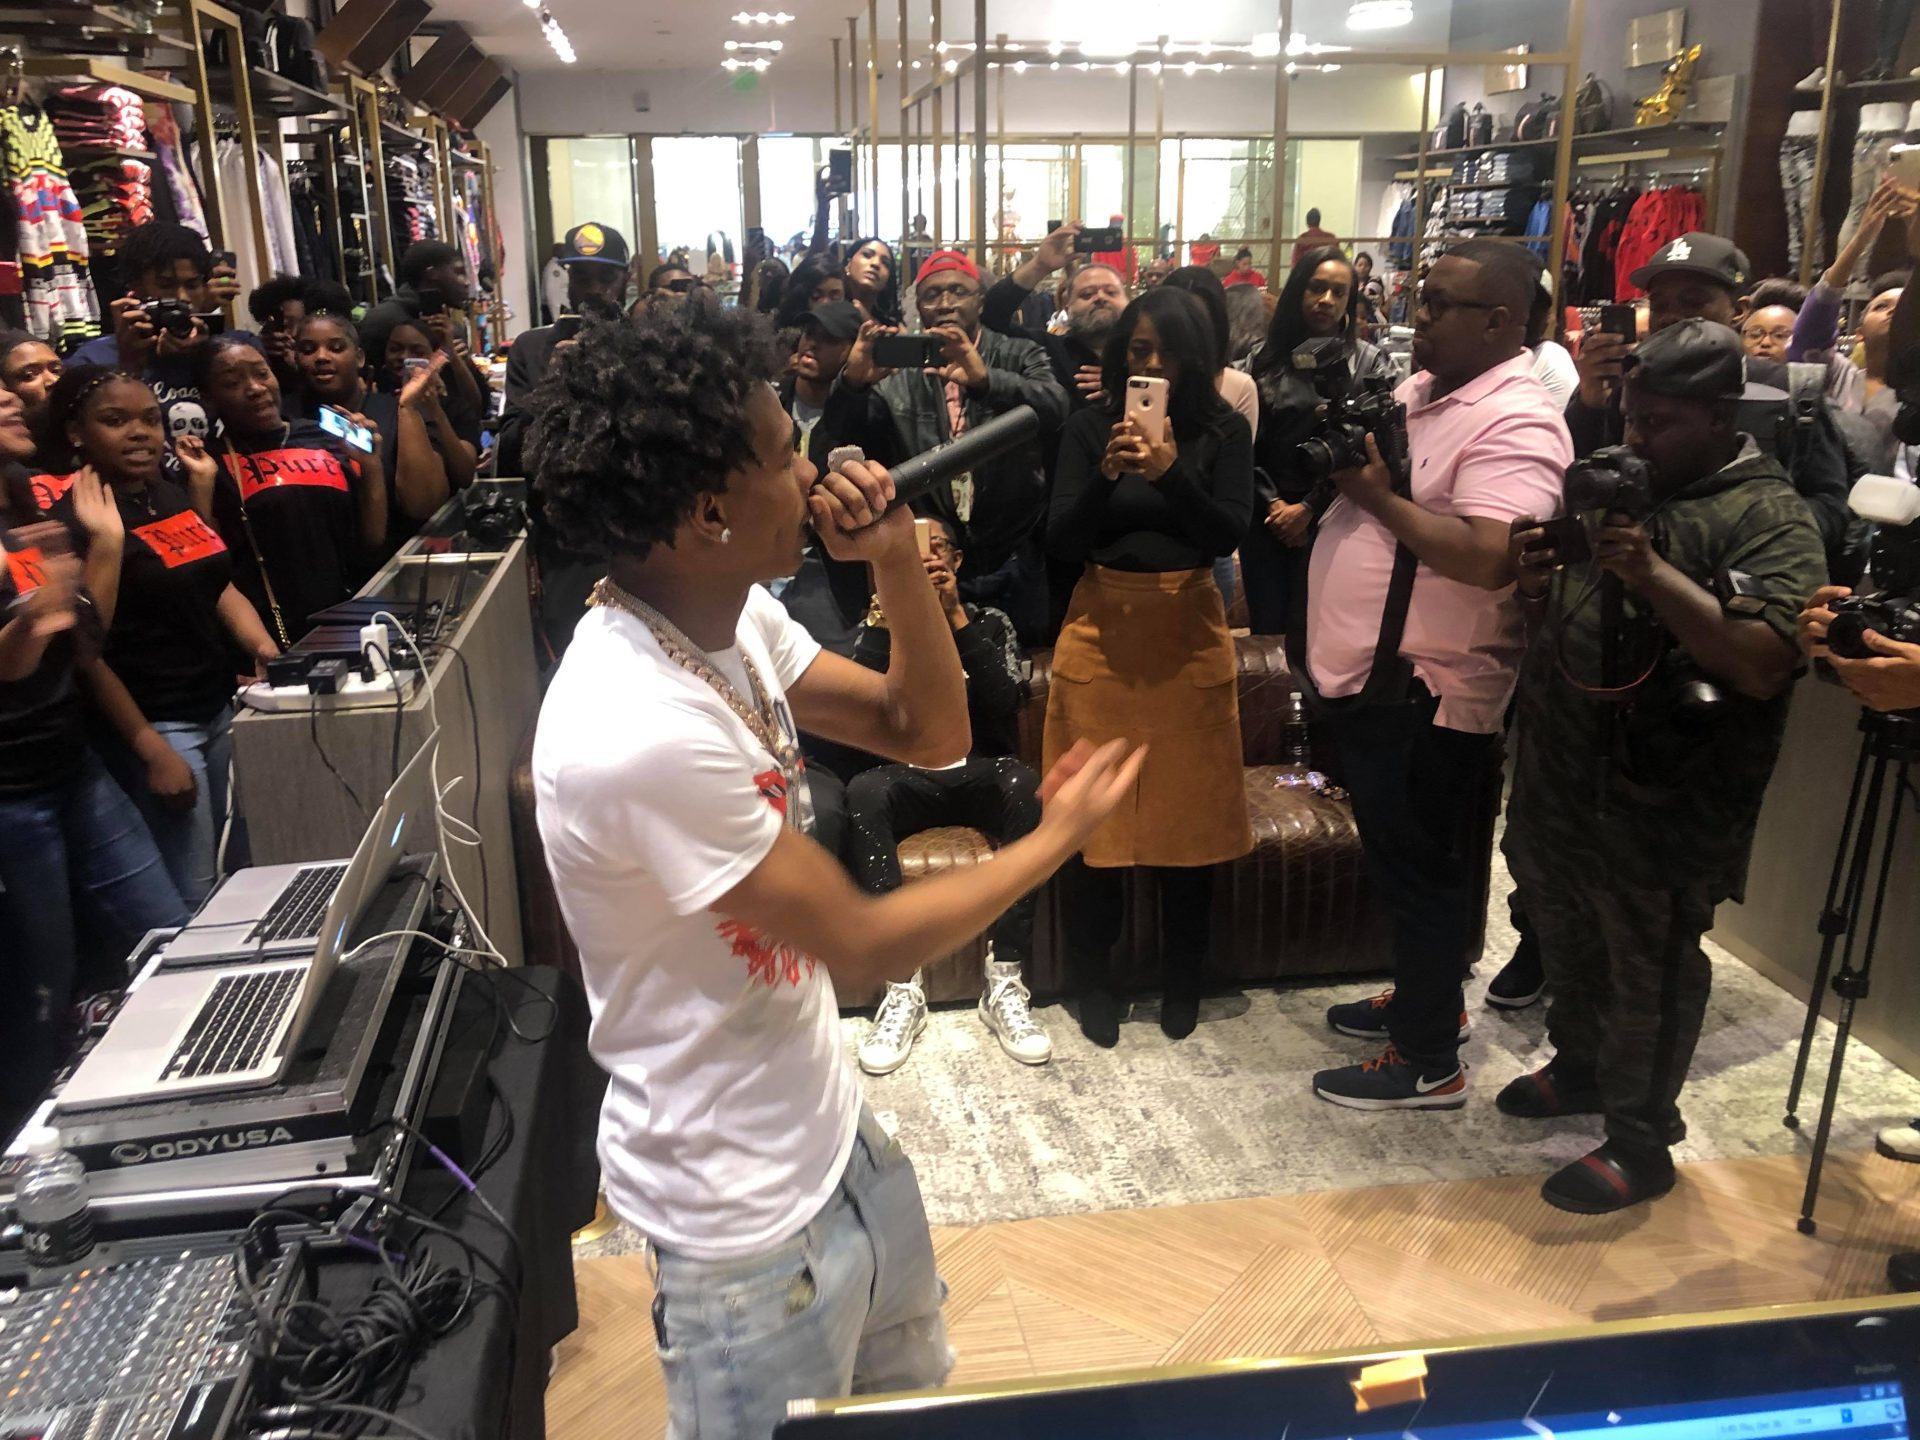 Atlanta Rapper Lil Baby Reveals New Clothing Collection with Pure Atlanta  “4PF” With Surprise Performance & More! - Sheen Magazine